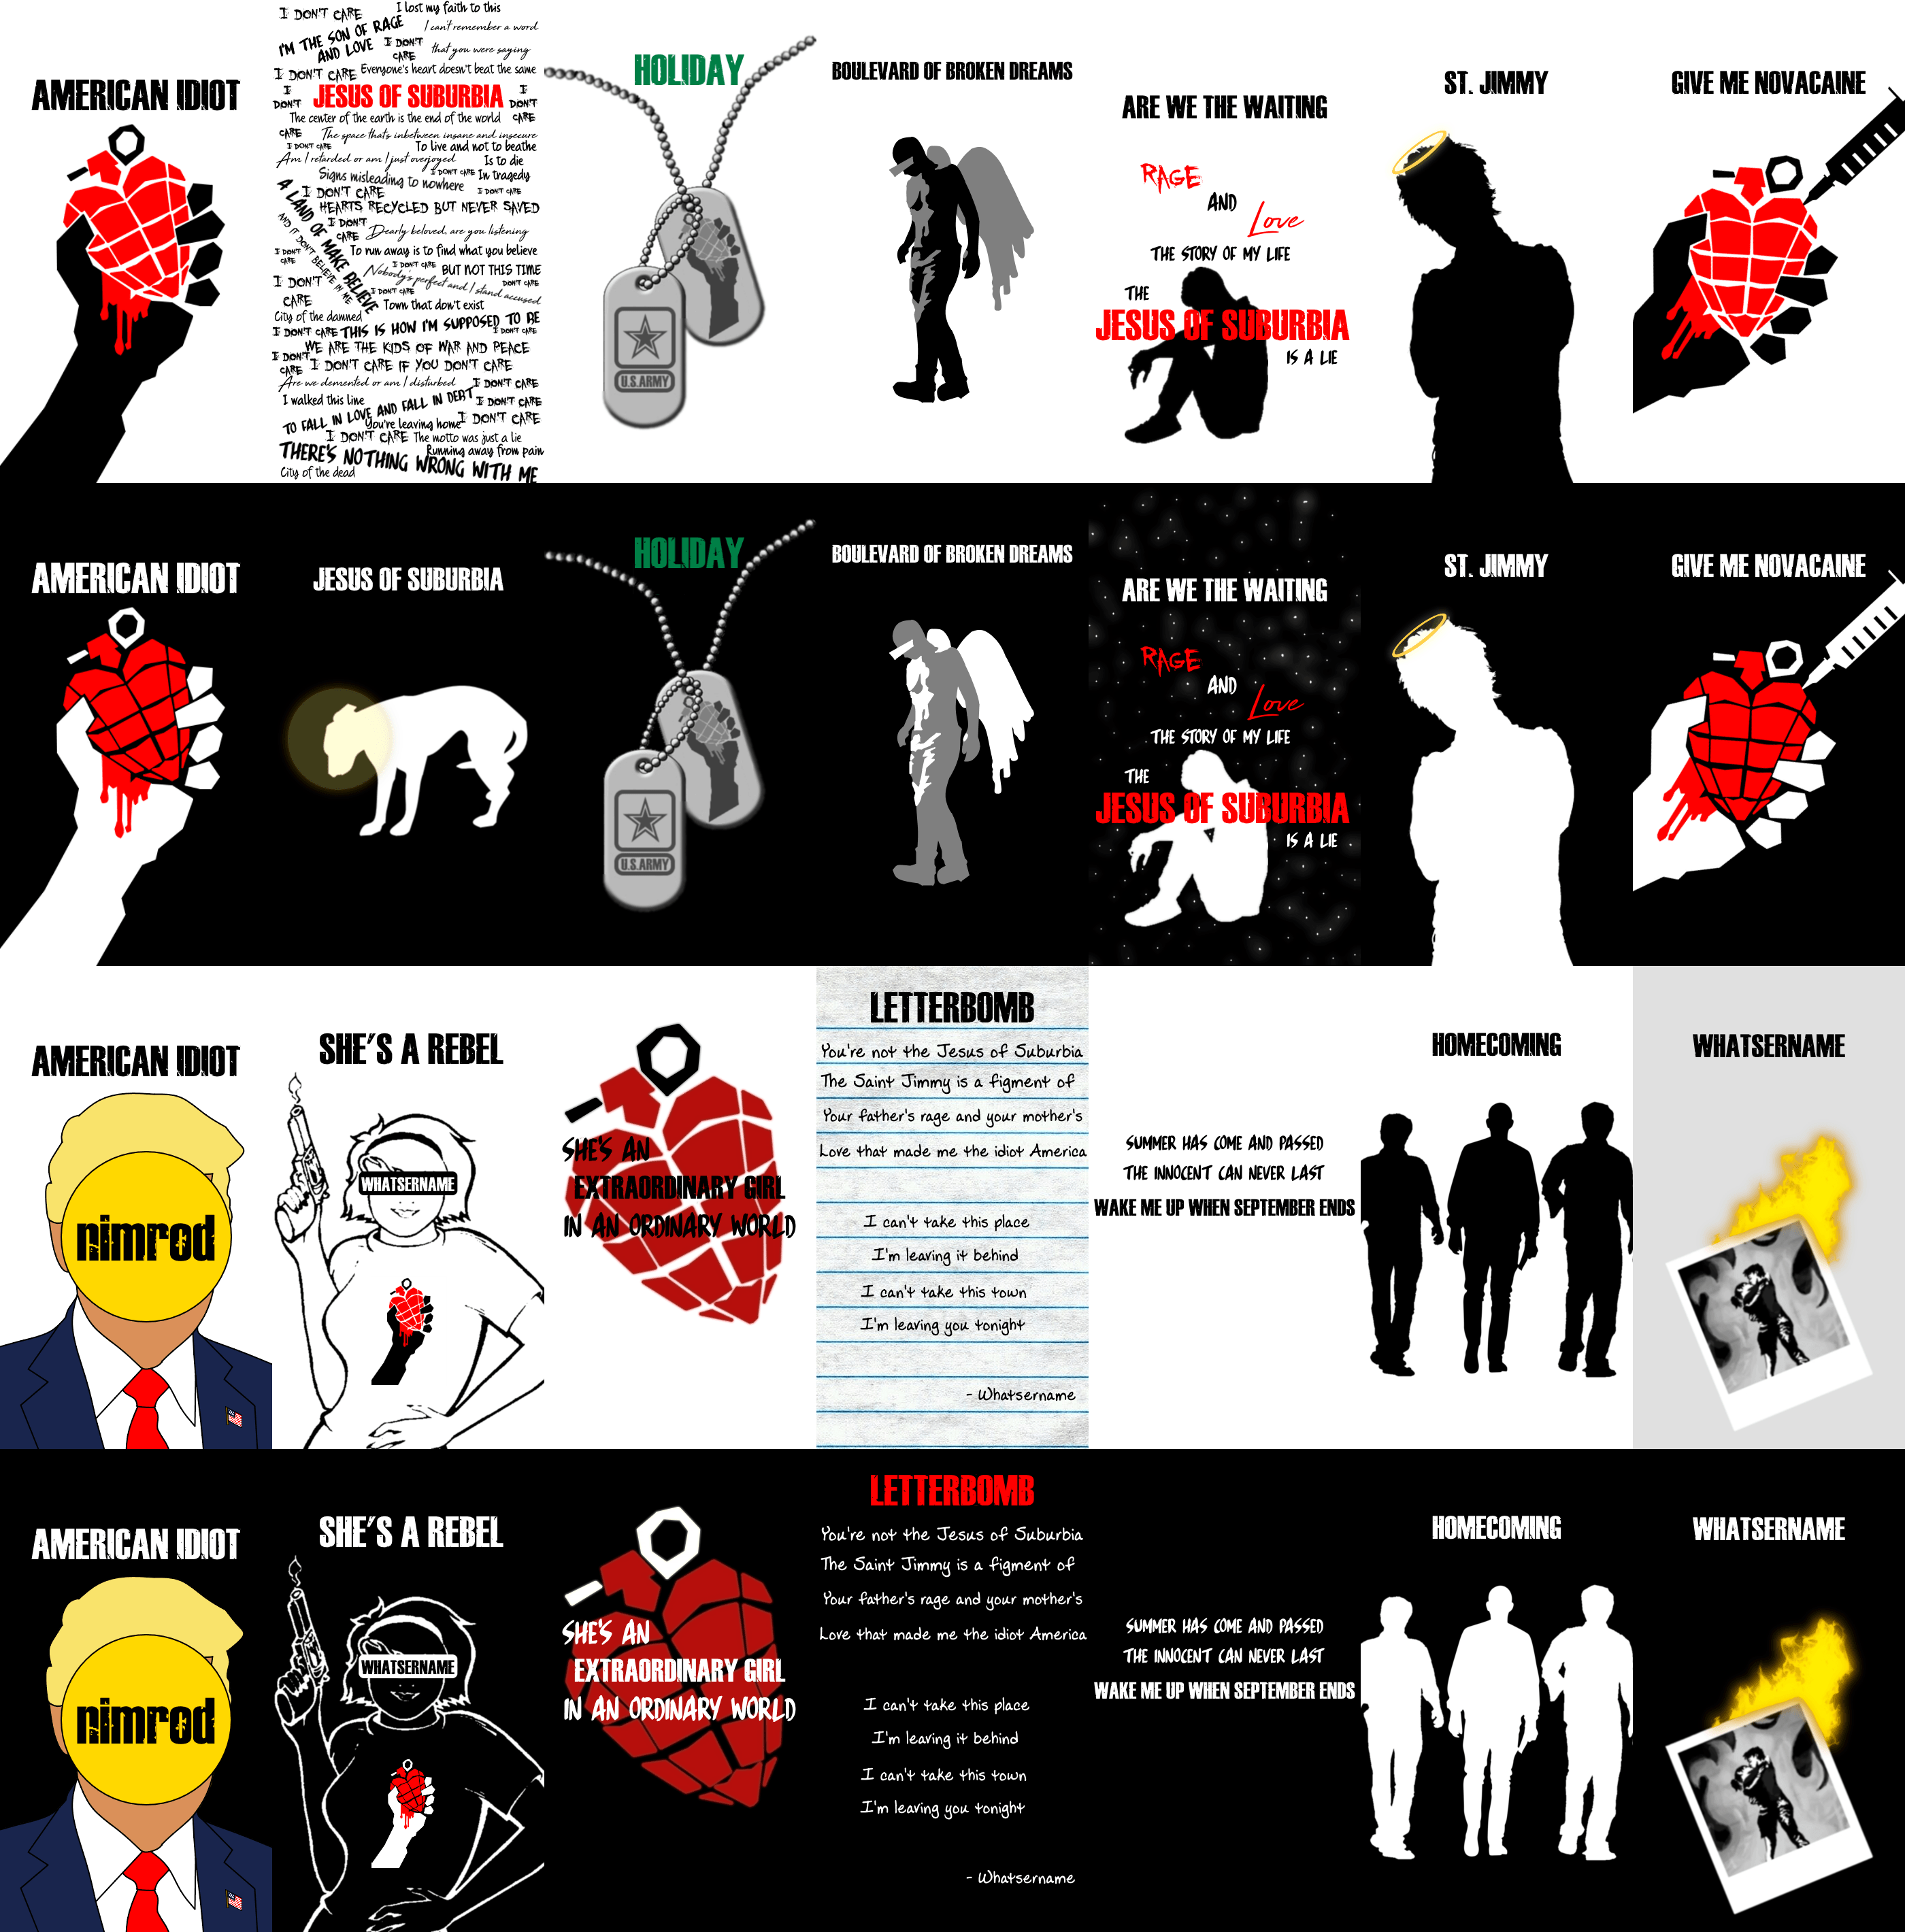 Made some wallpaper for American Idiot. Link is in the comments